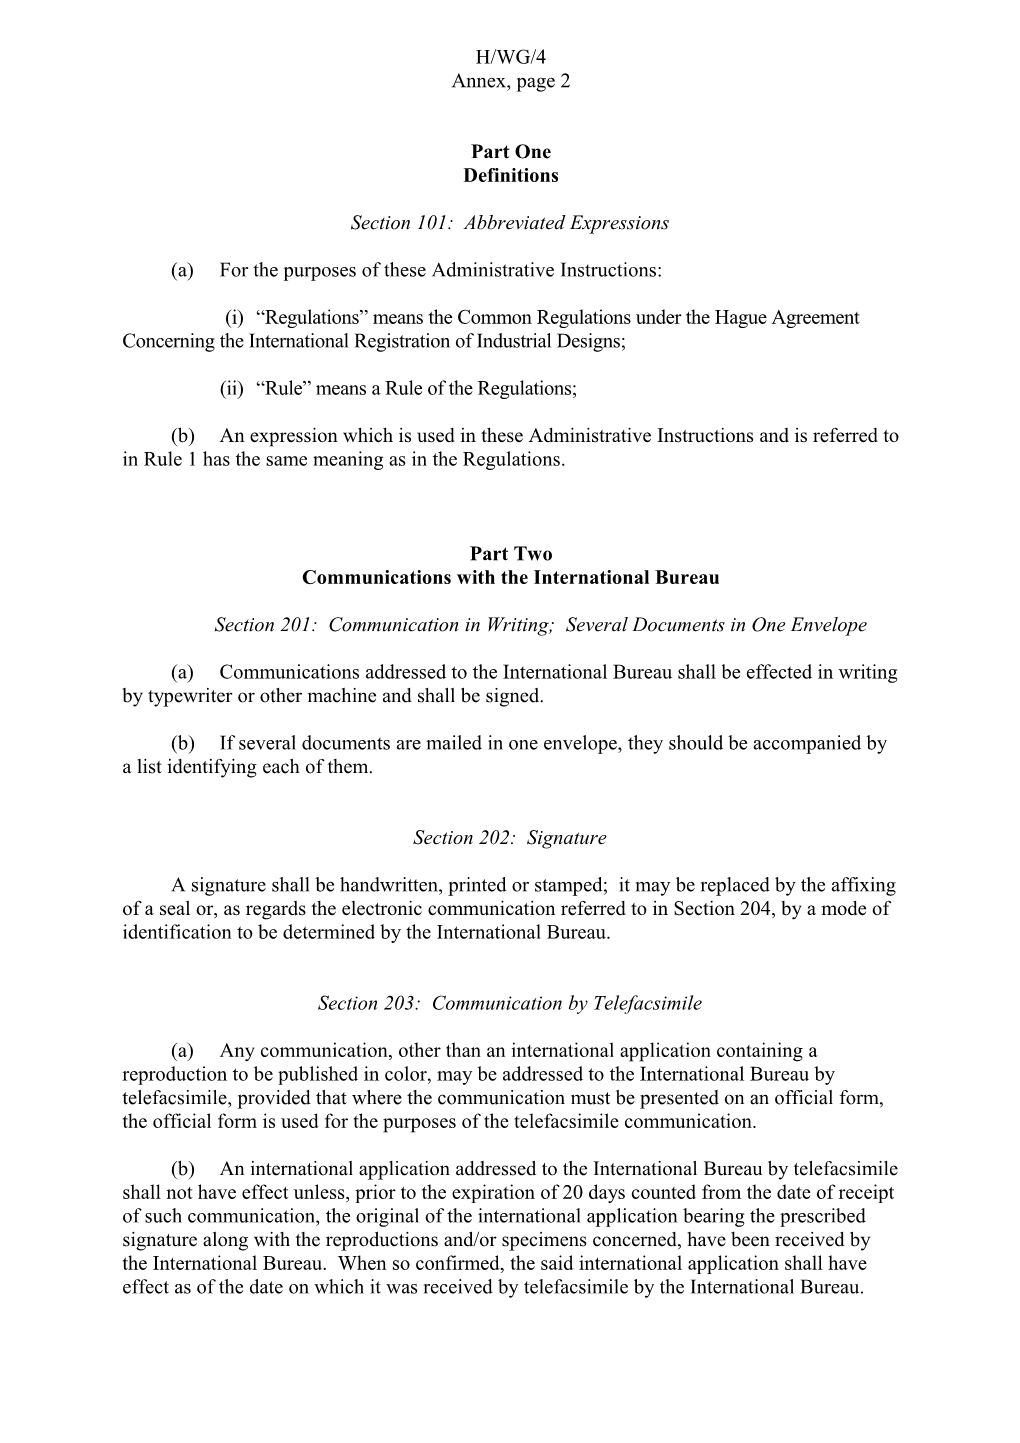 H/WG/4: Draft Administrative Instructions for the Application of the Hague Agreement Concerning